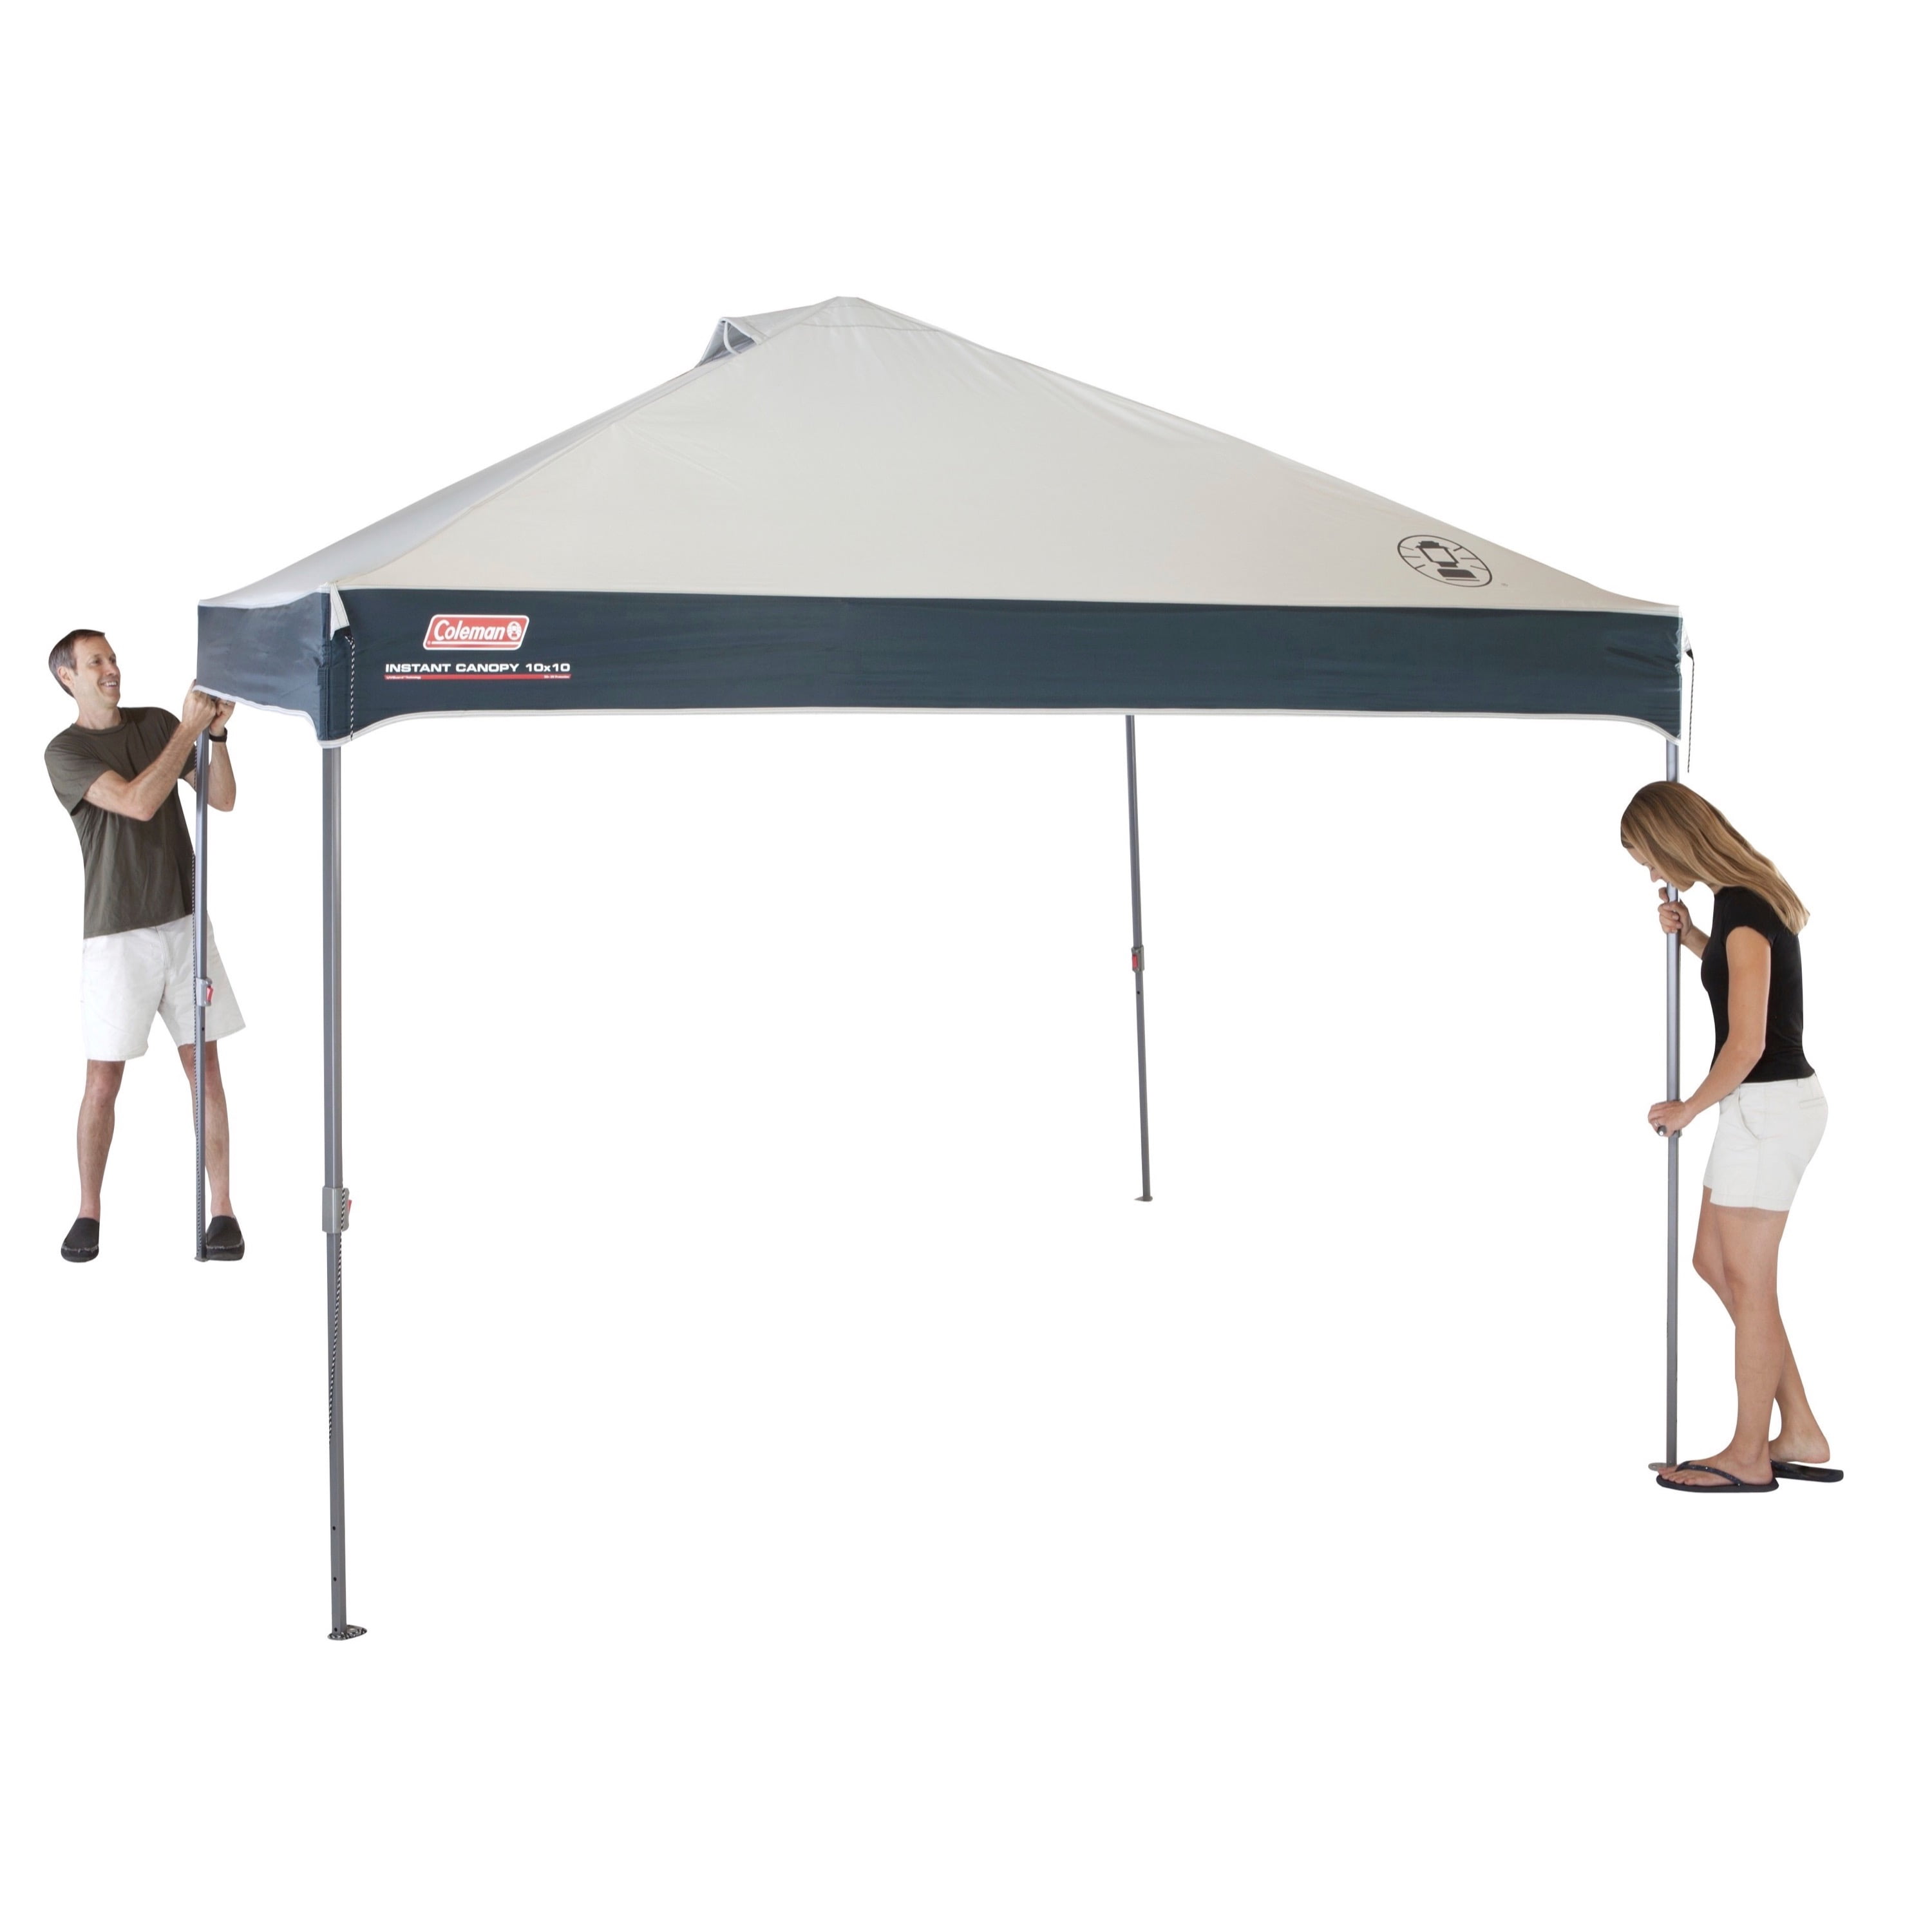 Details about   10'x10' INSTANT CANOPY Gazebo Straight Leg POP UP TENT Outdoor Tailgate Shelter 